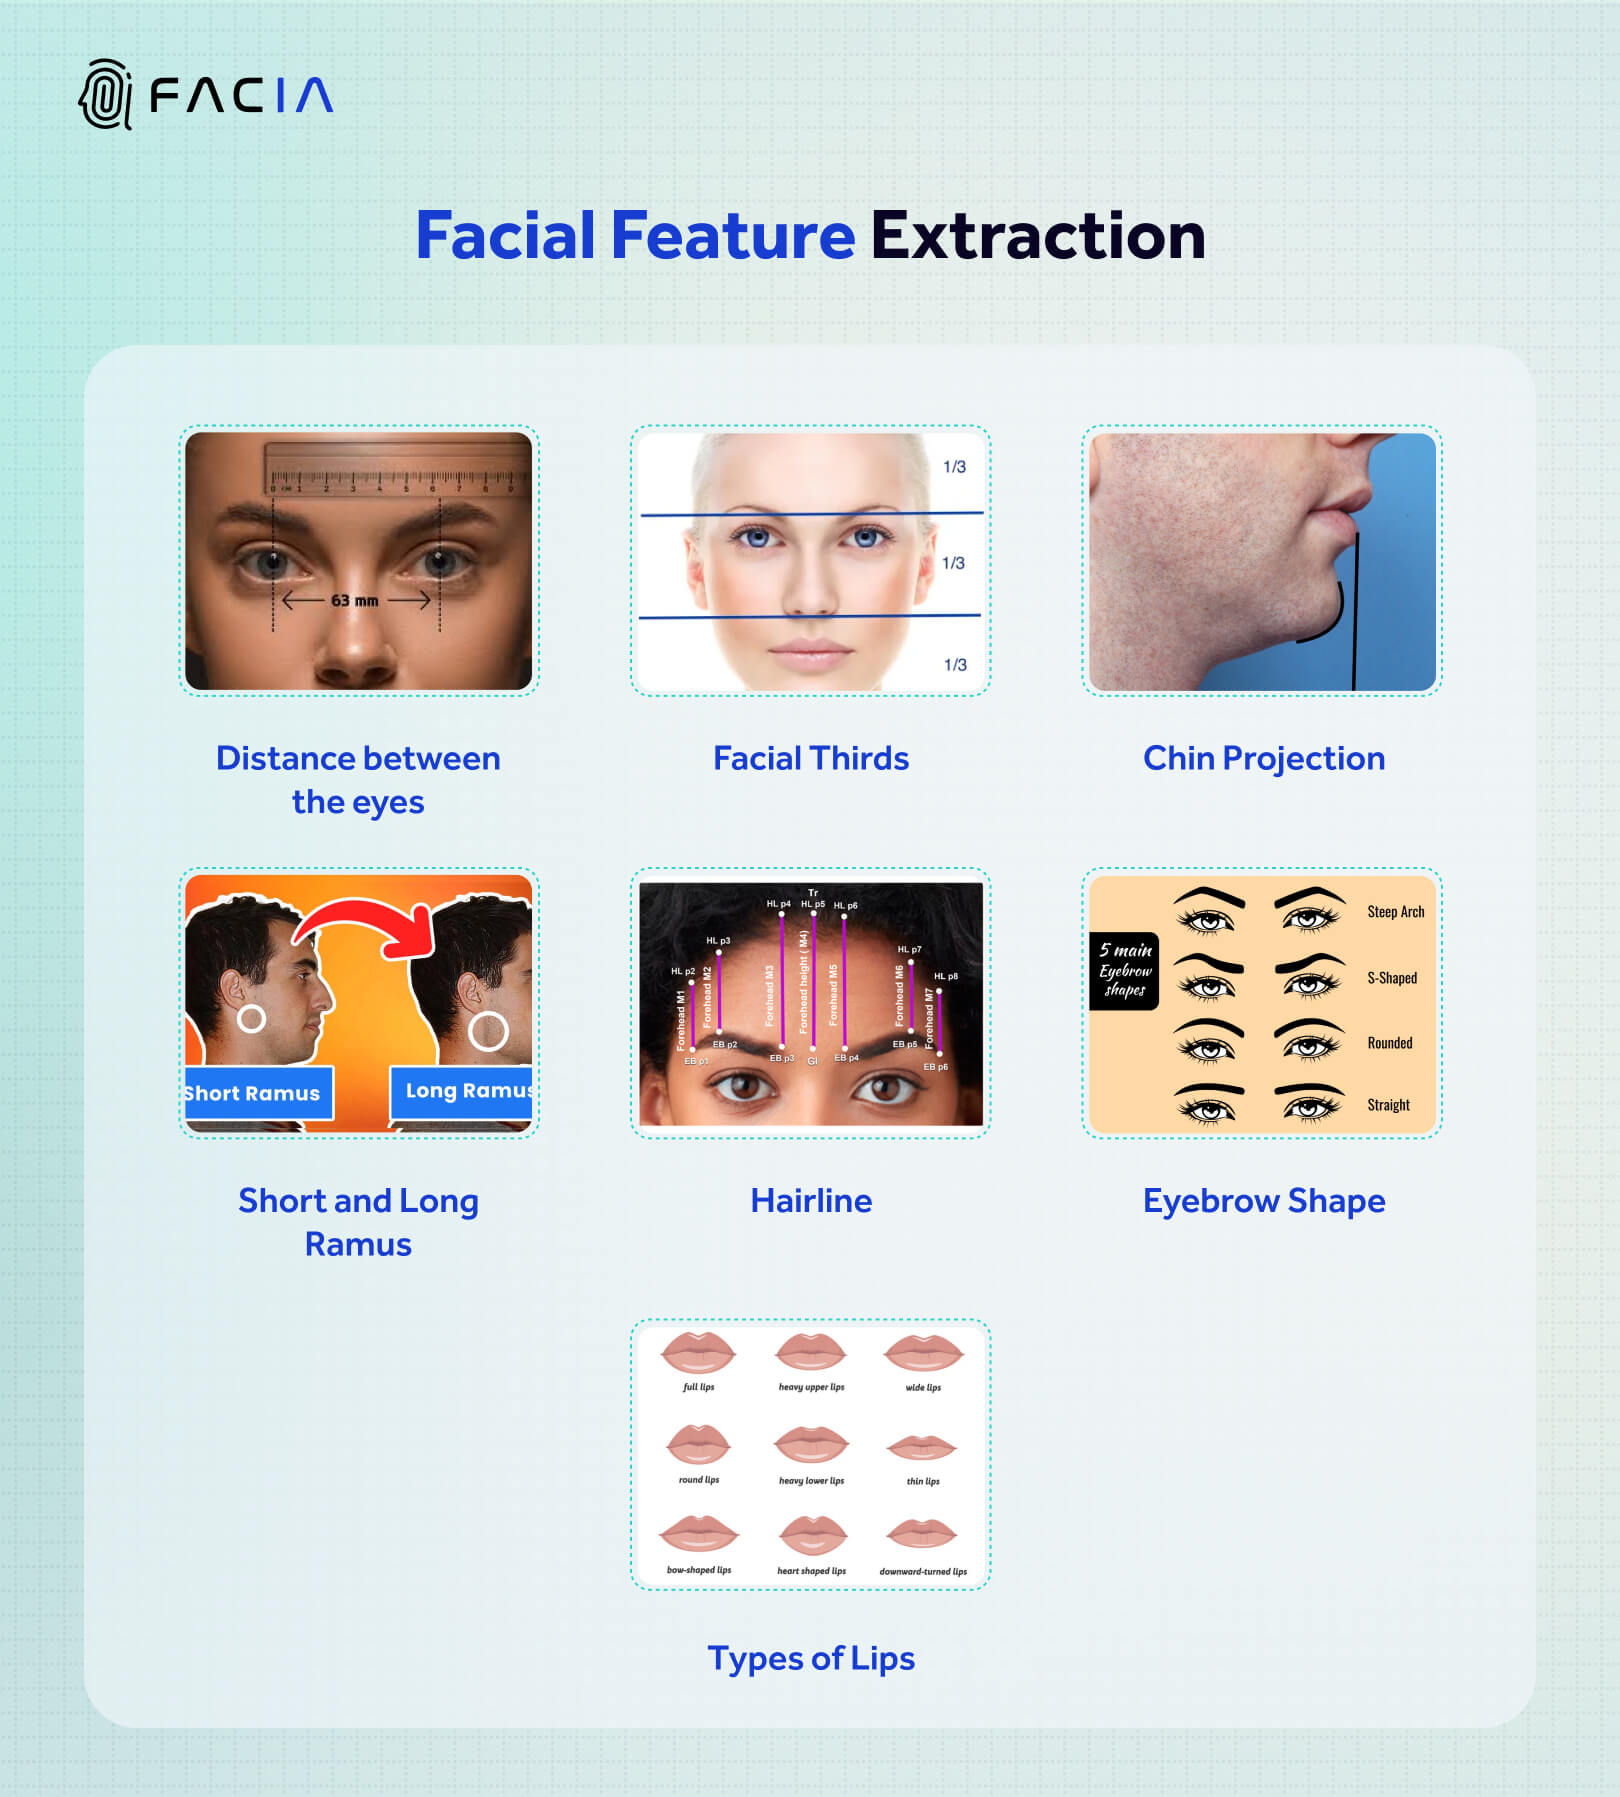 The image shows a visual illustration of the facial features that are extracted during the face comparison process. It includes: 1) Distance Between Eyes 2) Facial thirds 3) Chin Projection 4) Short or Long Ramus 5) Hairline 6) Eyebrow Shape 7) Types of Lips